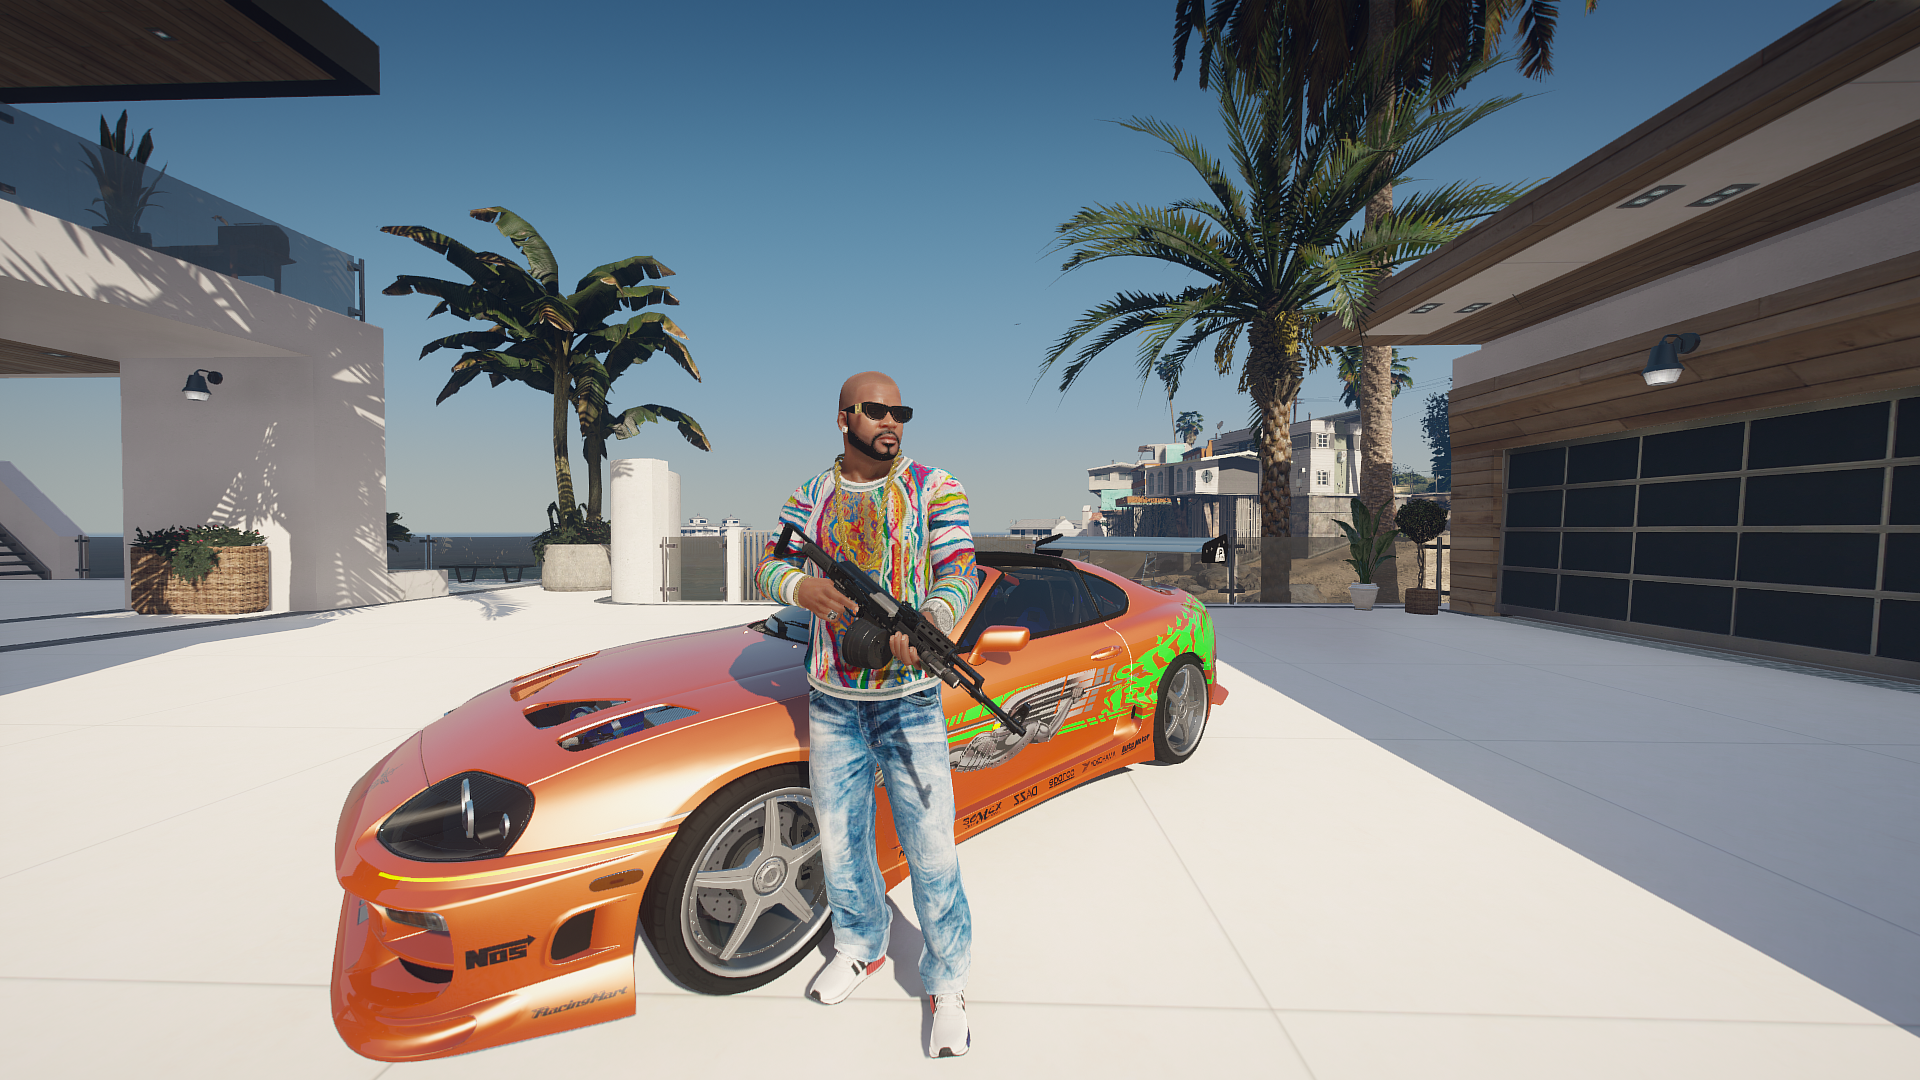 Toyota Paul Walker Grand Theft Auto V Grand Theft Auto Gucci PC Gaming Adidas Sunny Guns And Men New 1920x1080